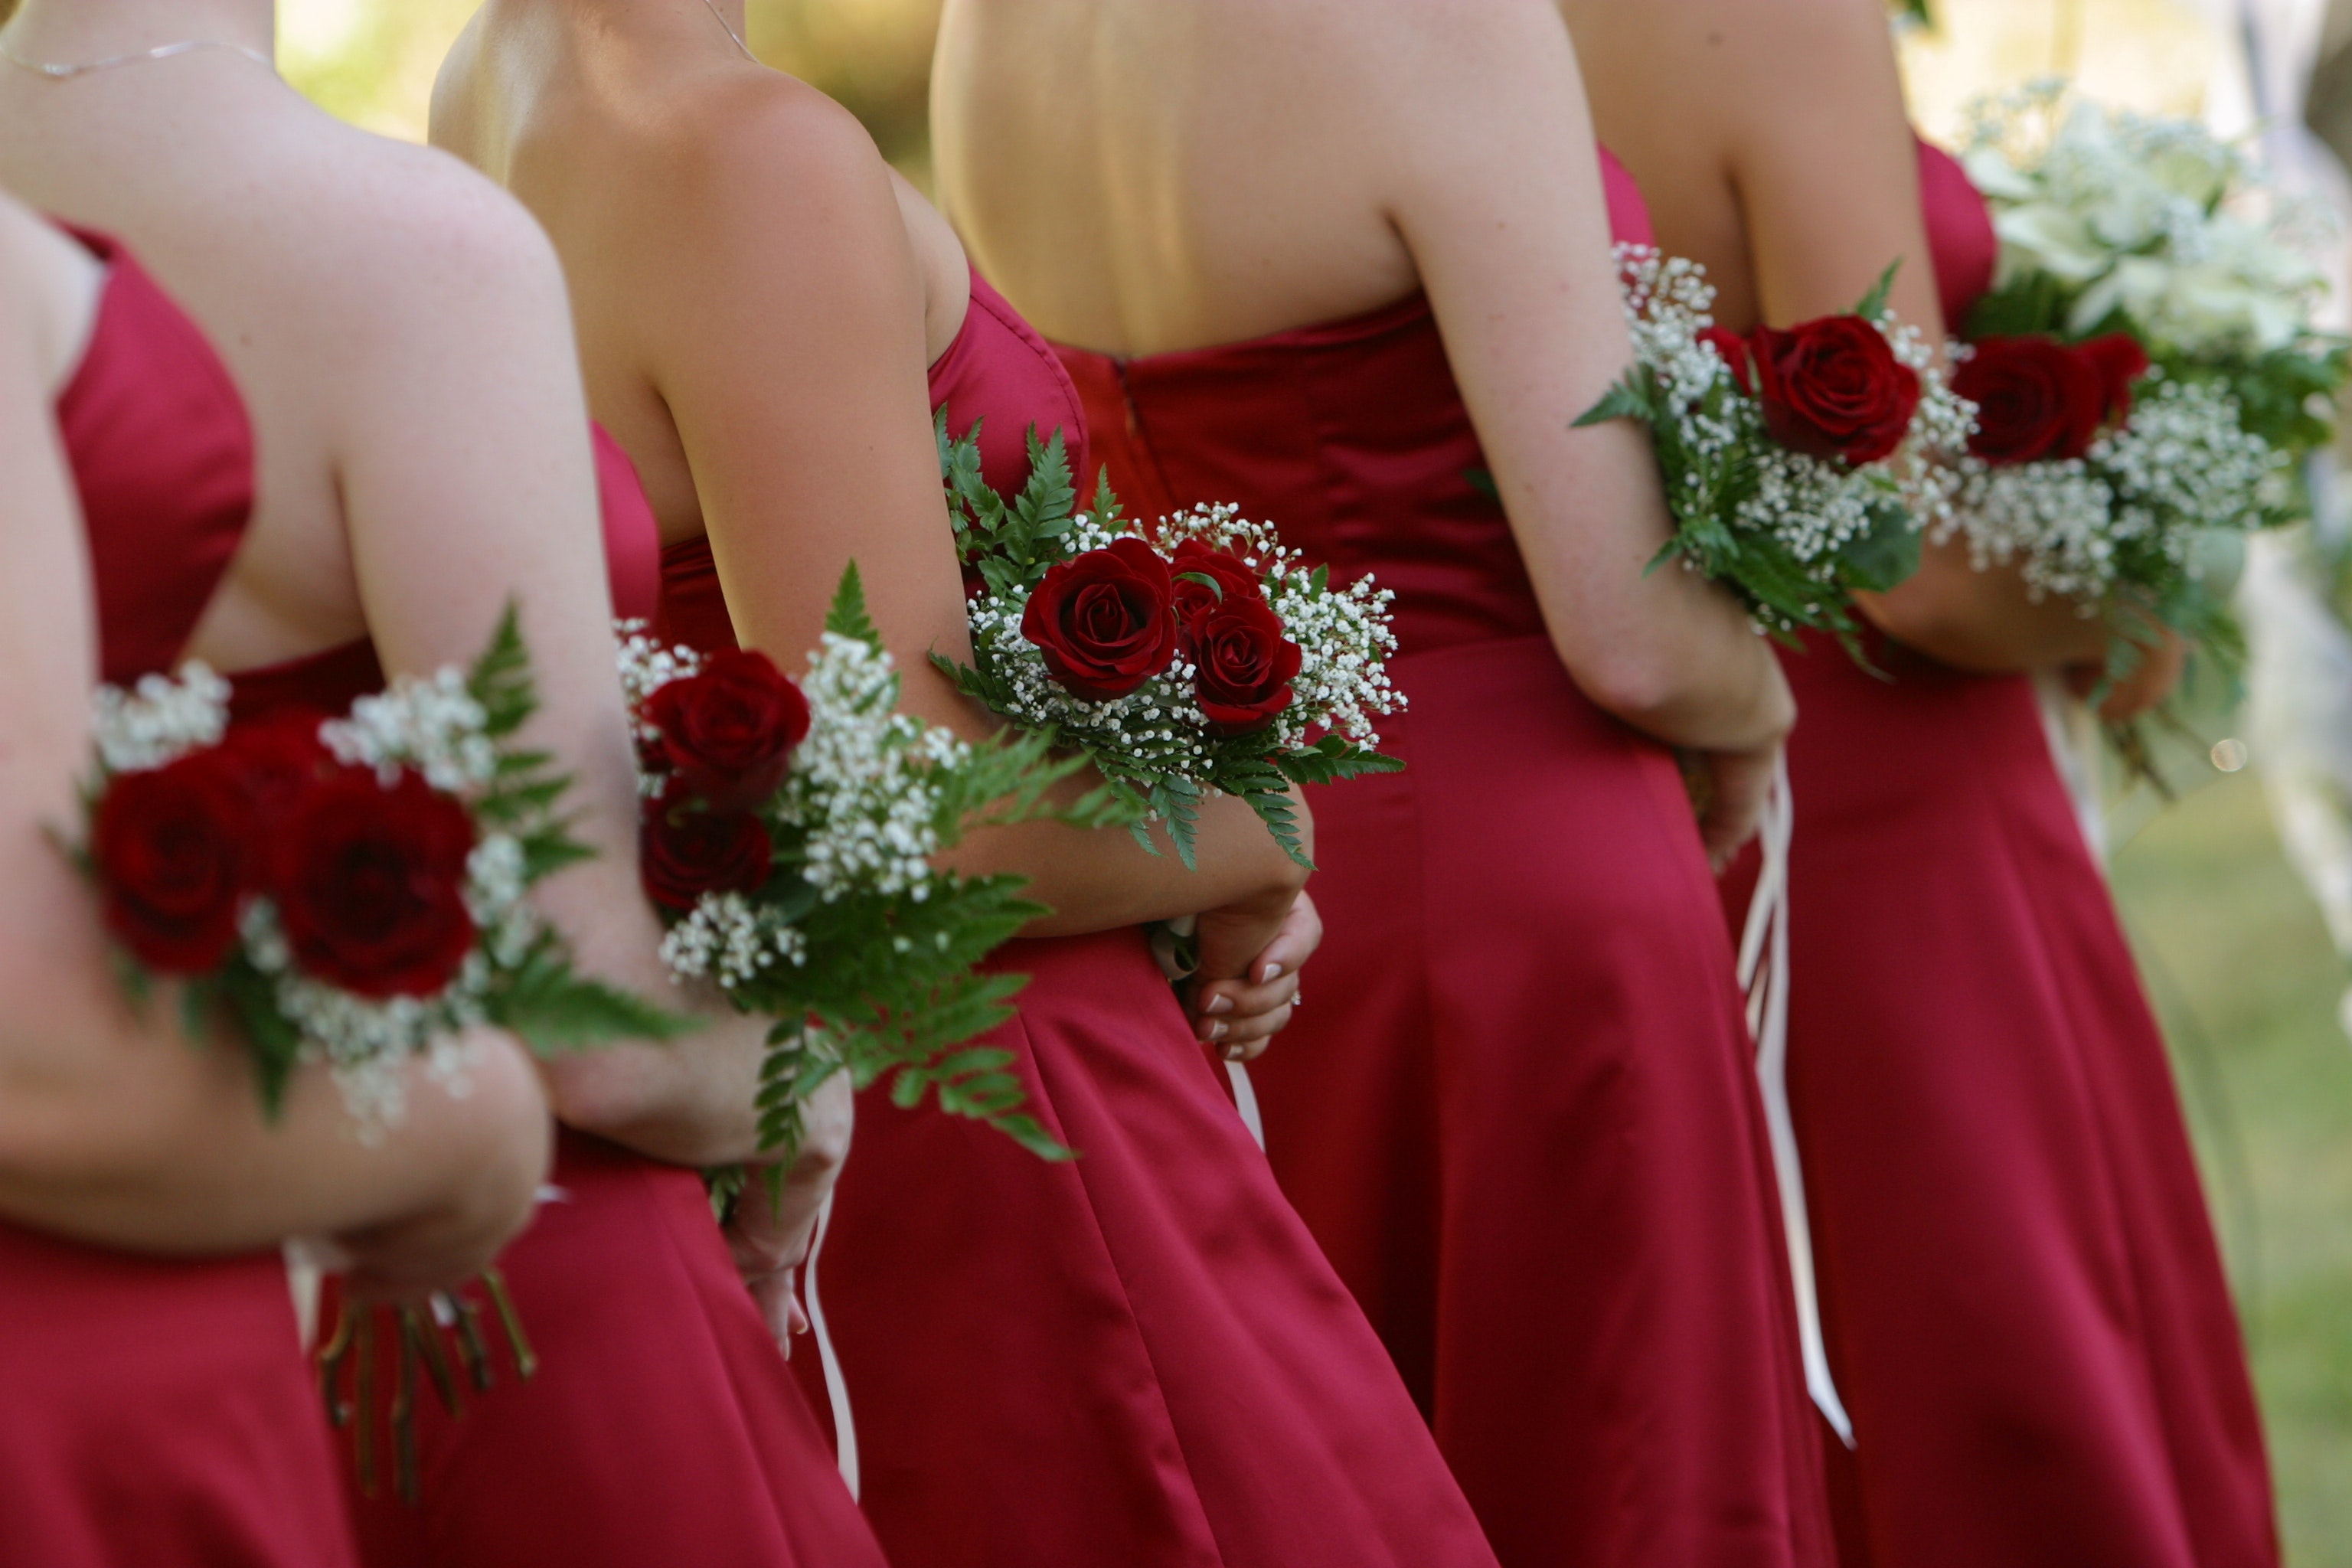 Brides groom wearing red cocktail dress photo